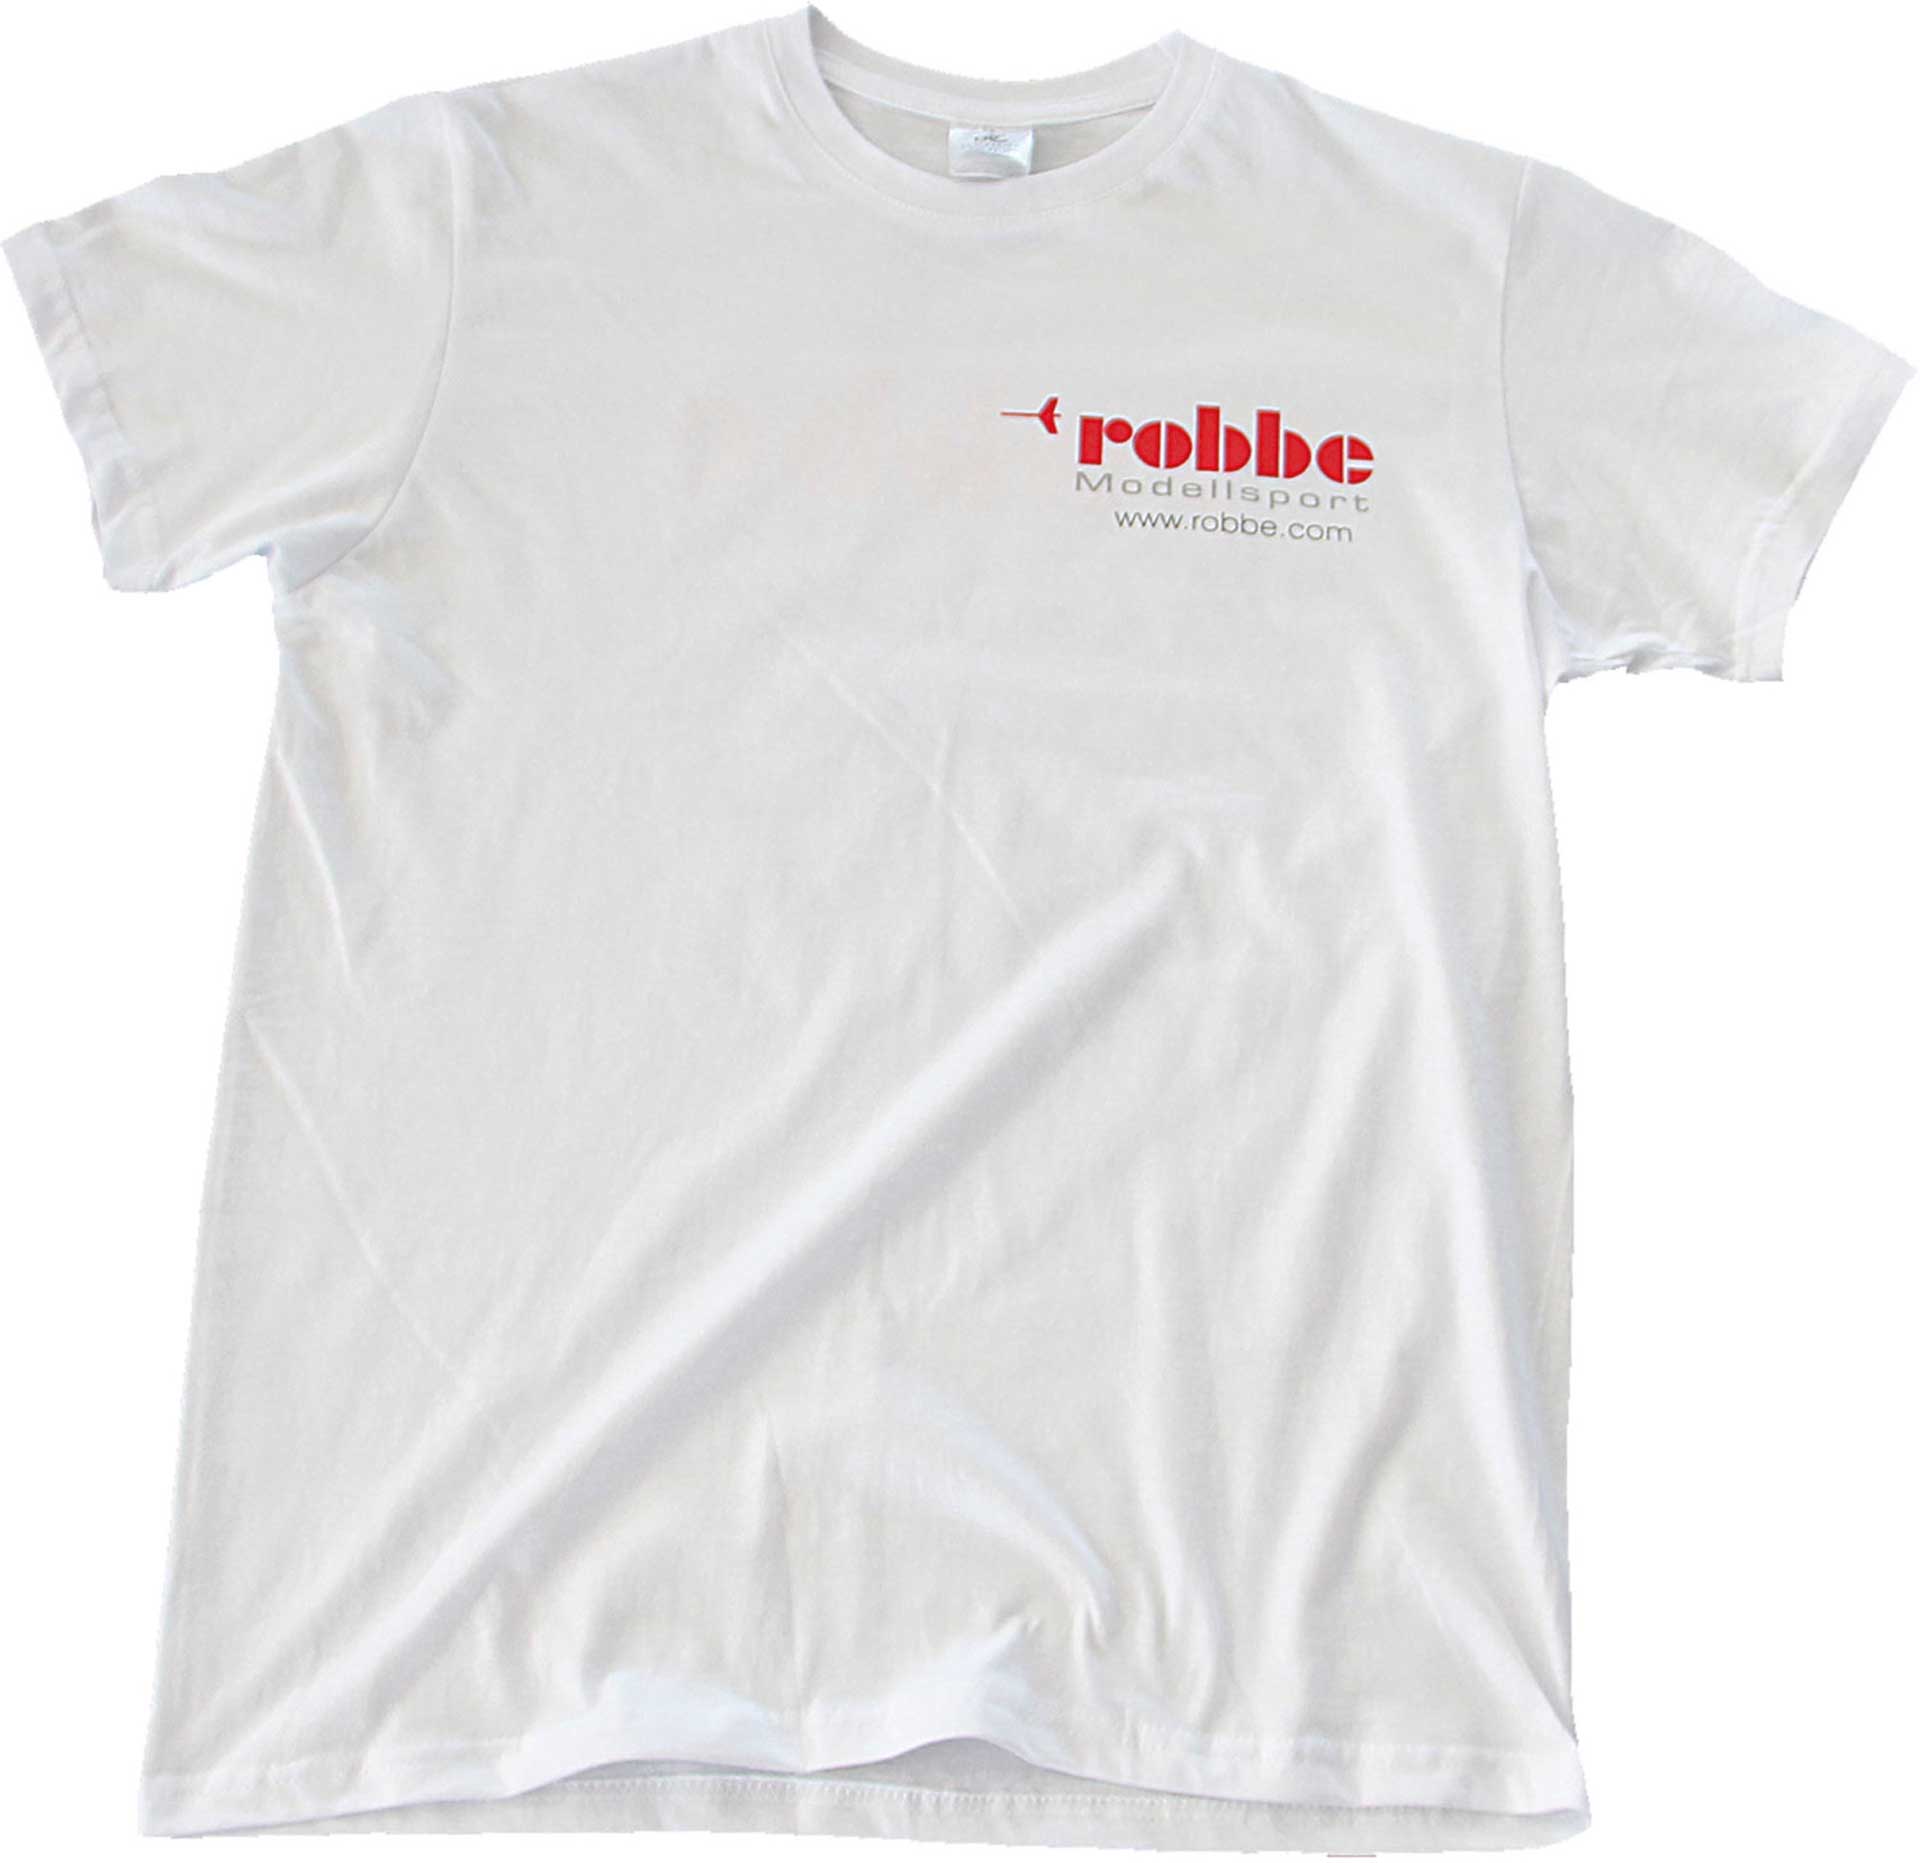 Robbe Modellsport T-SHIRT TAILLE M